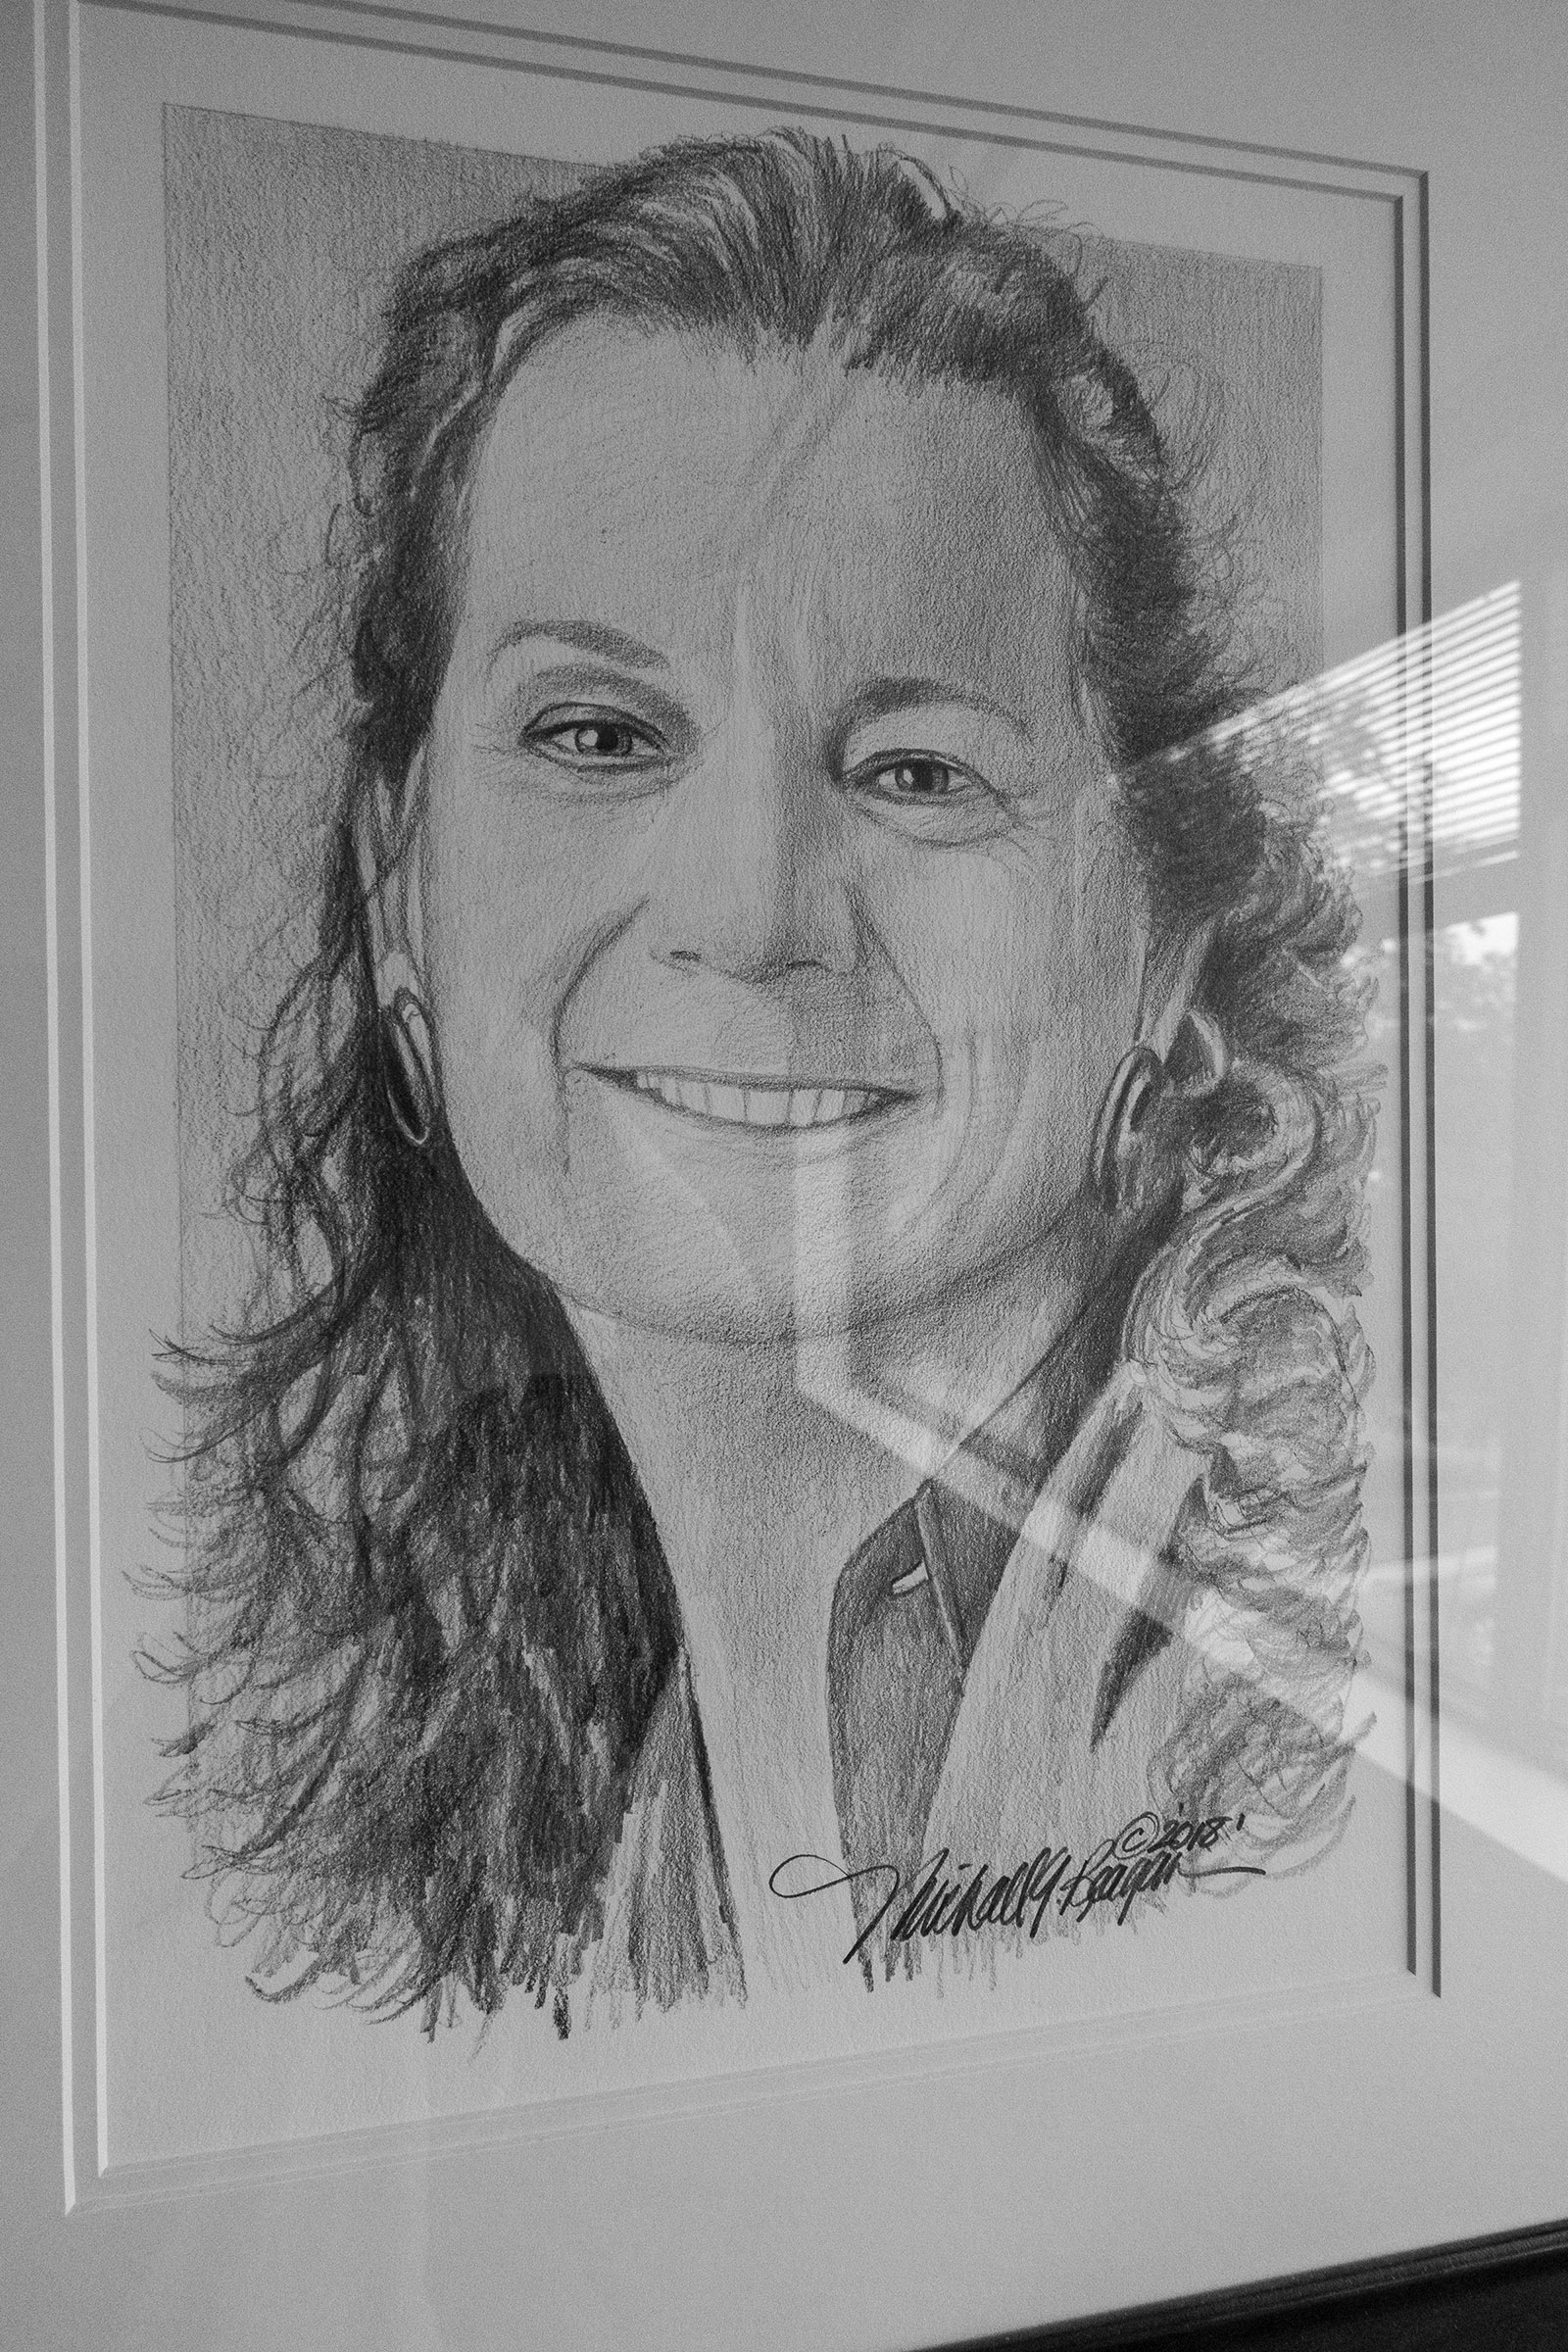 A drawing of shooting victim, Wendi Winters, hangs in the conference room at the new office. (Moises Saman—Magnum Photos for TIME)